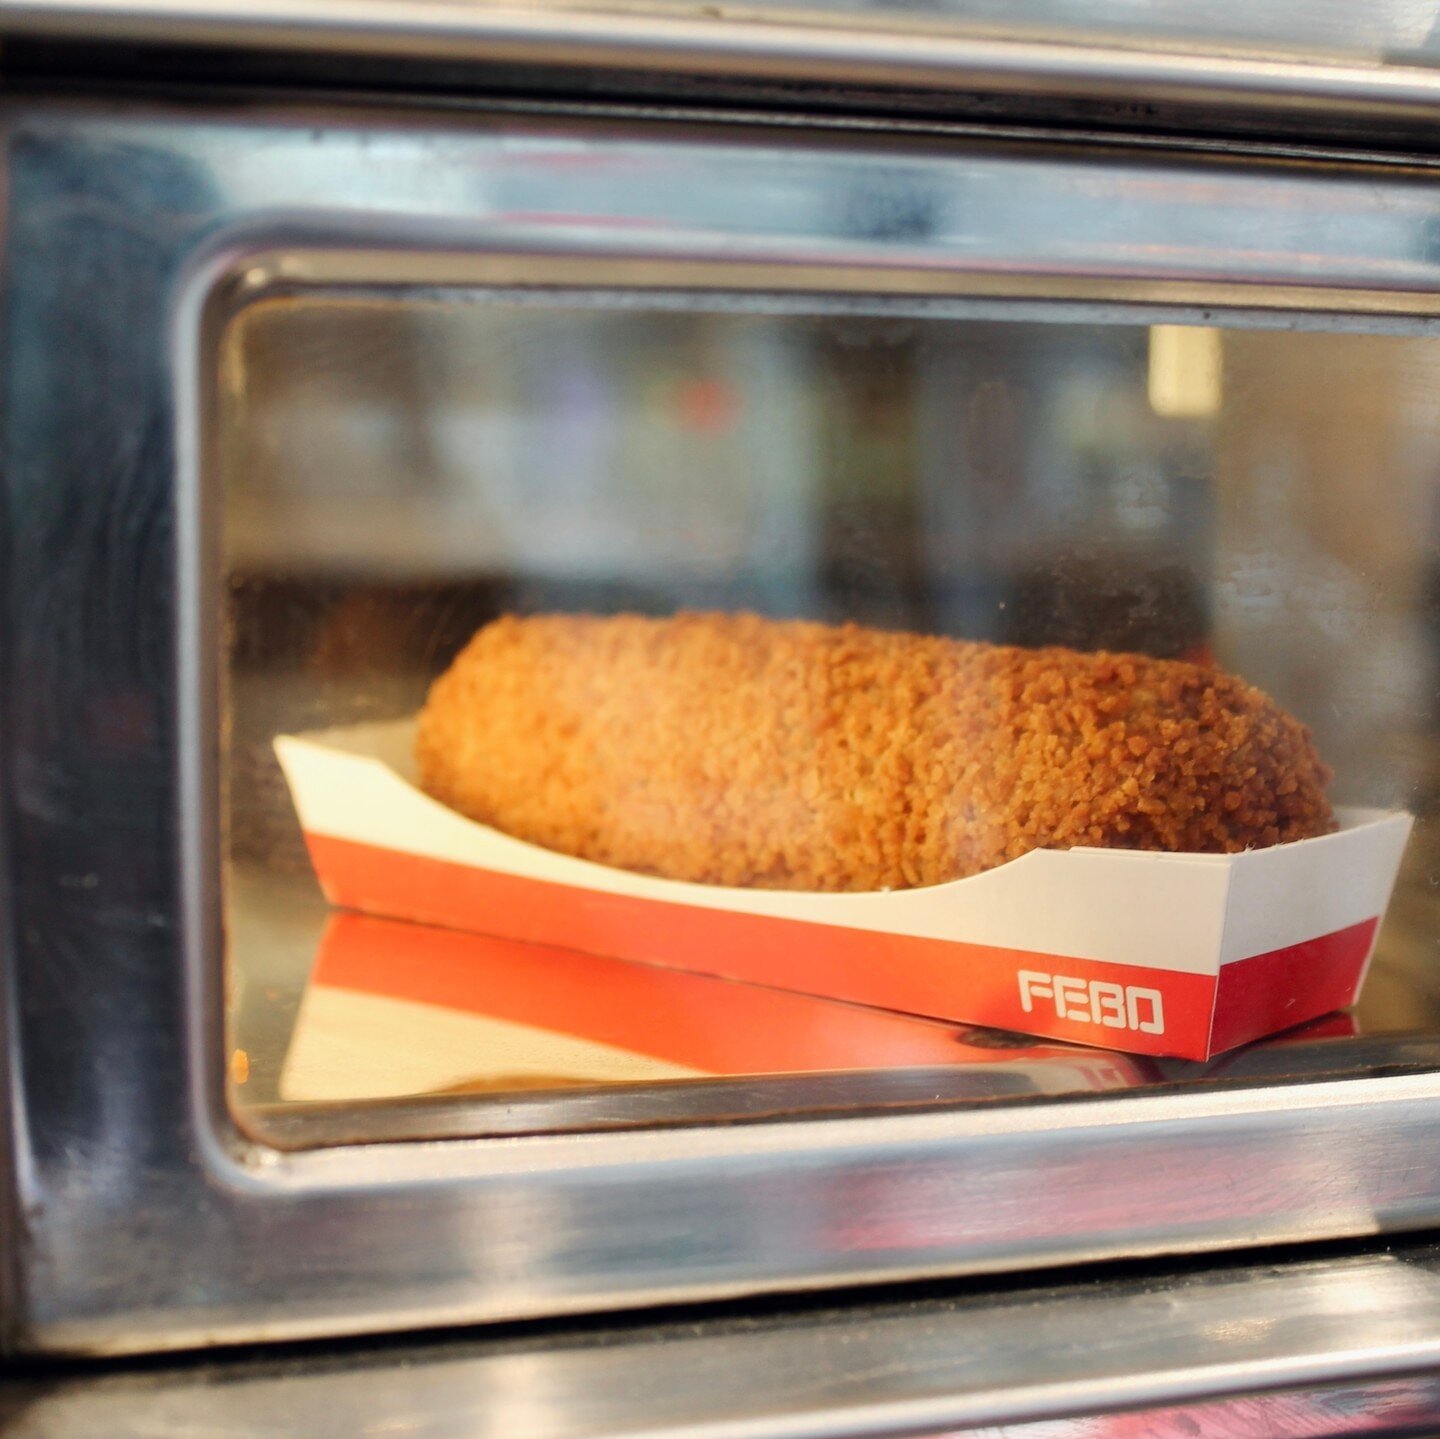 If you think of typical, warm dutch snack food, you think of a Kroket. Especially when it comes from Febo (Dutch quick service restaurant.) ⁠
⁠
This crunchy on the outside, soft on the inside snack is a filling and satisfying treat. The inside is a c